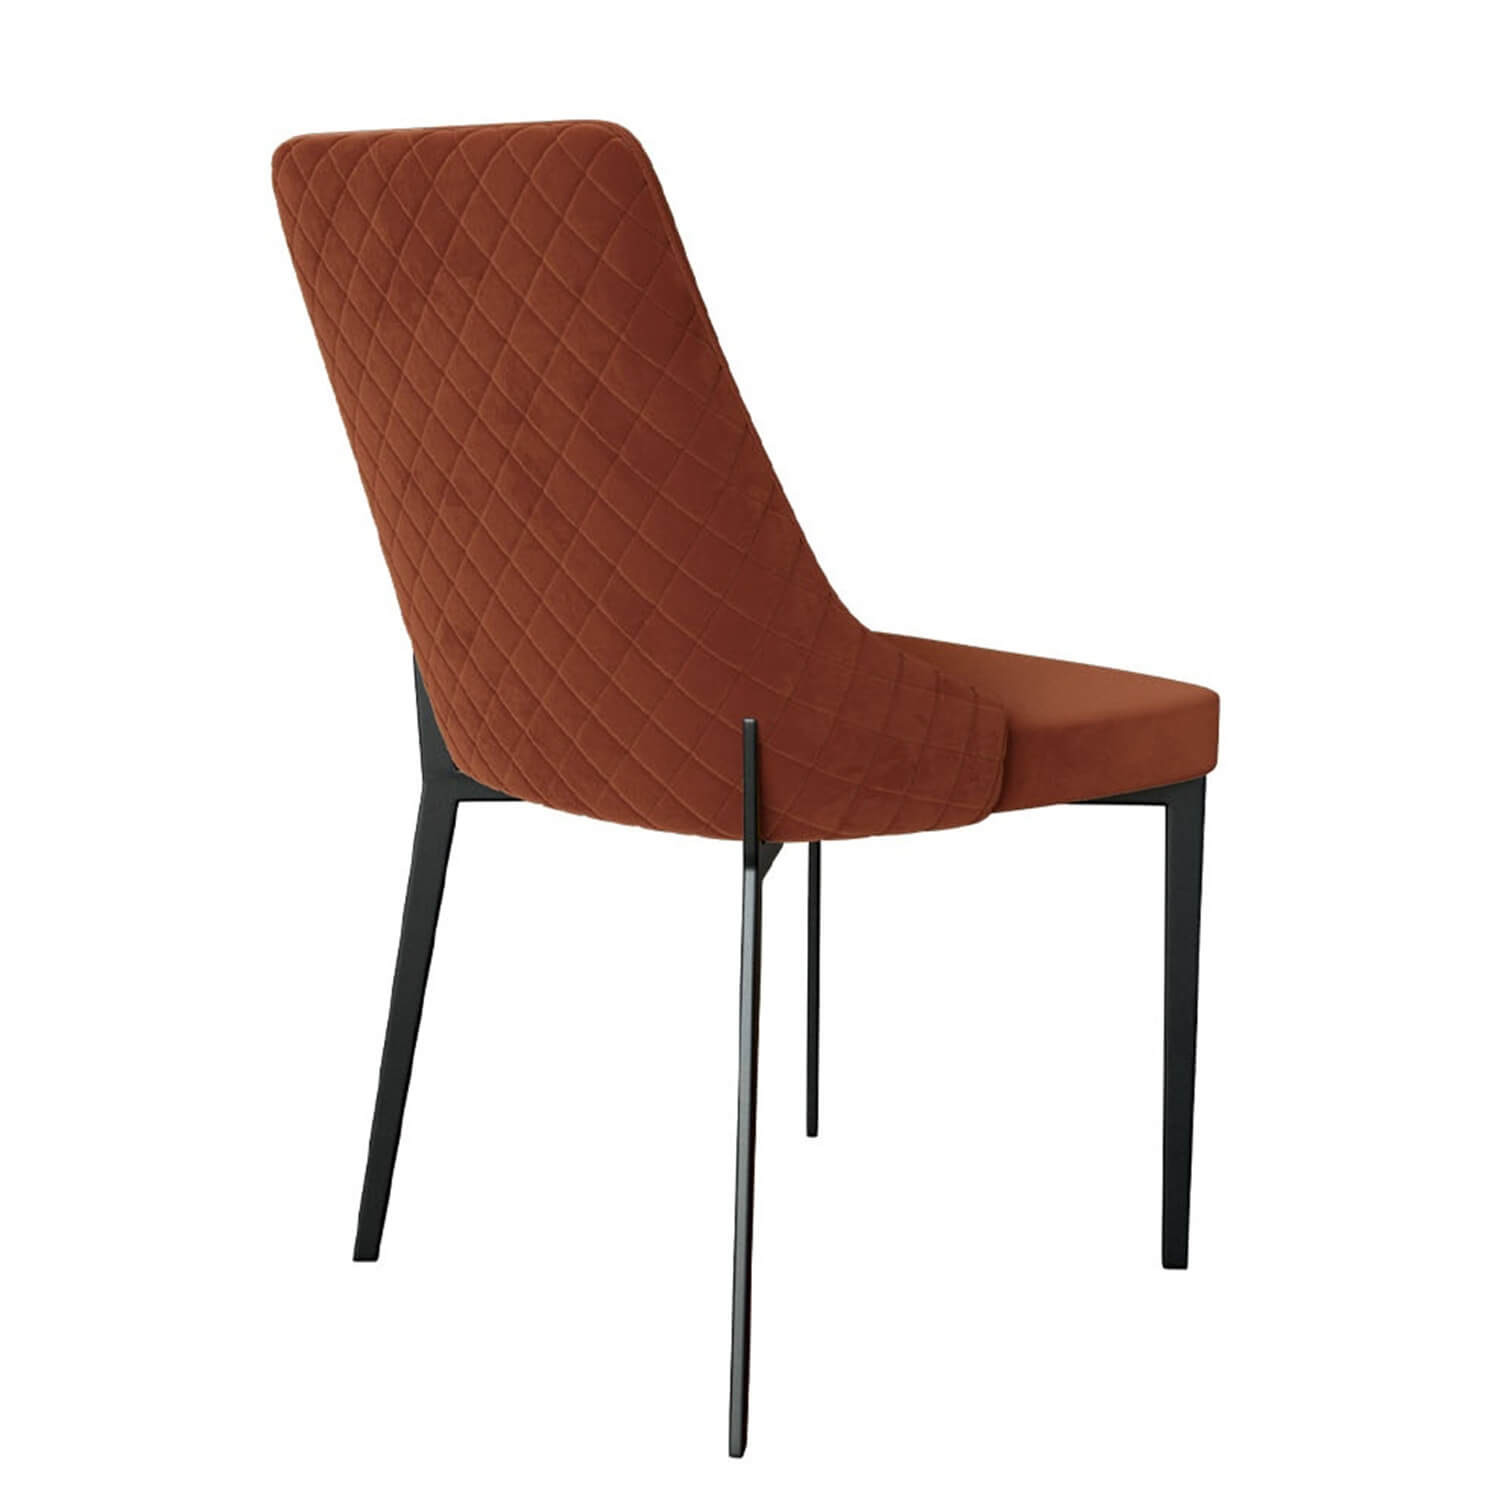 Guidonia dining chair